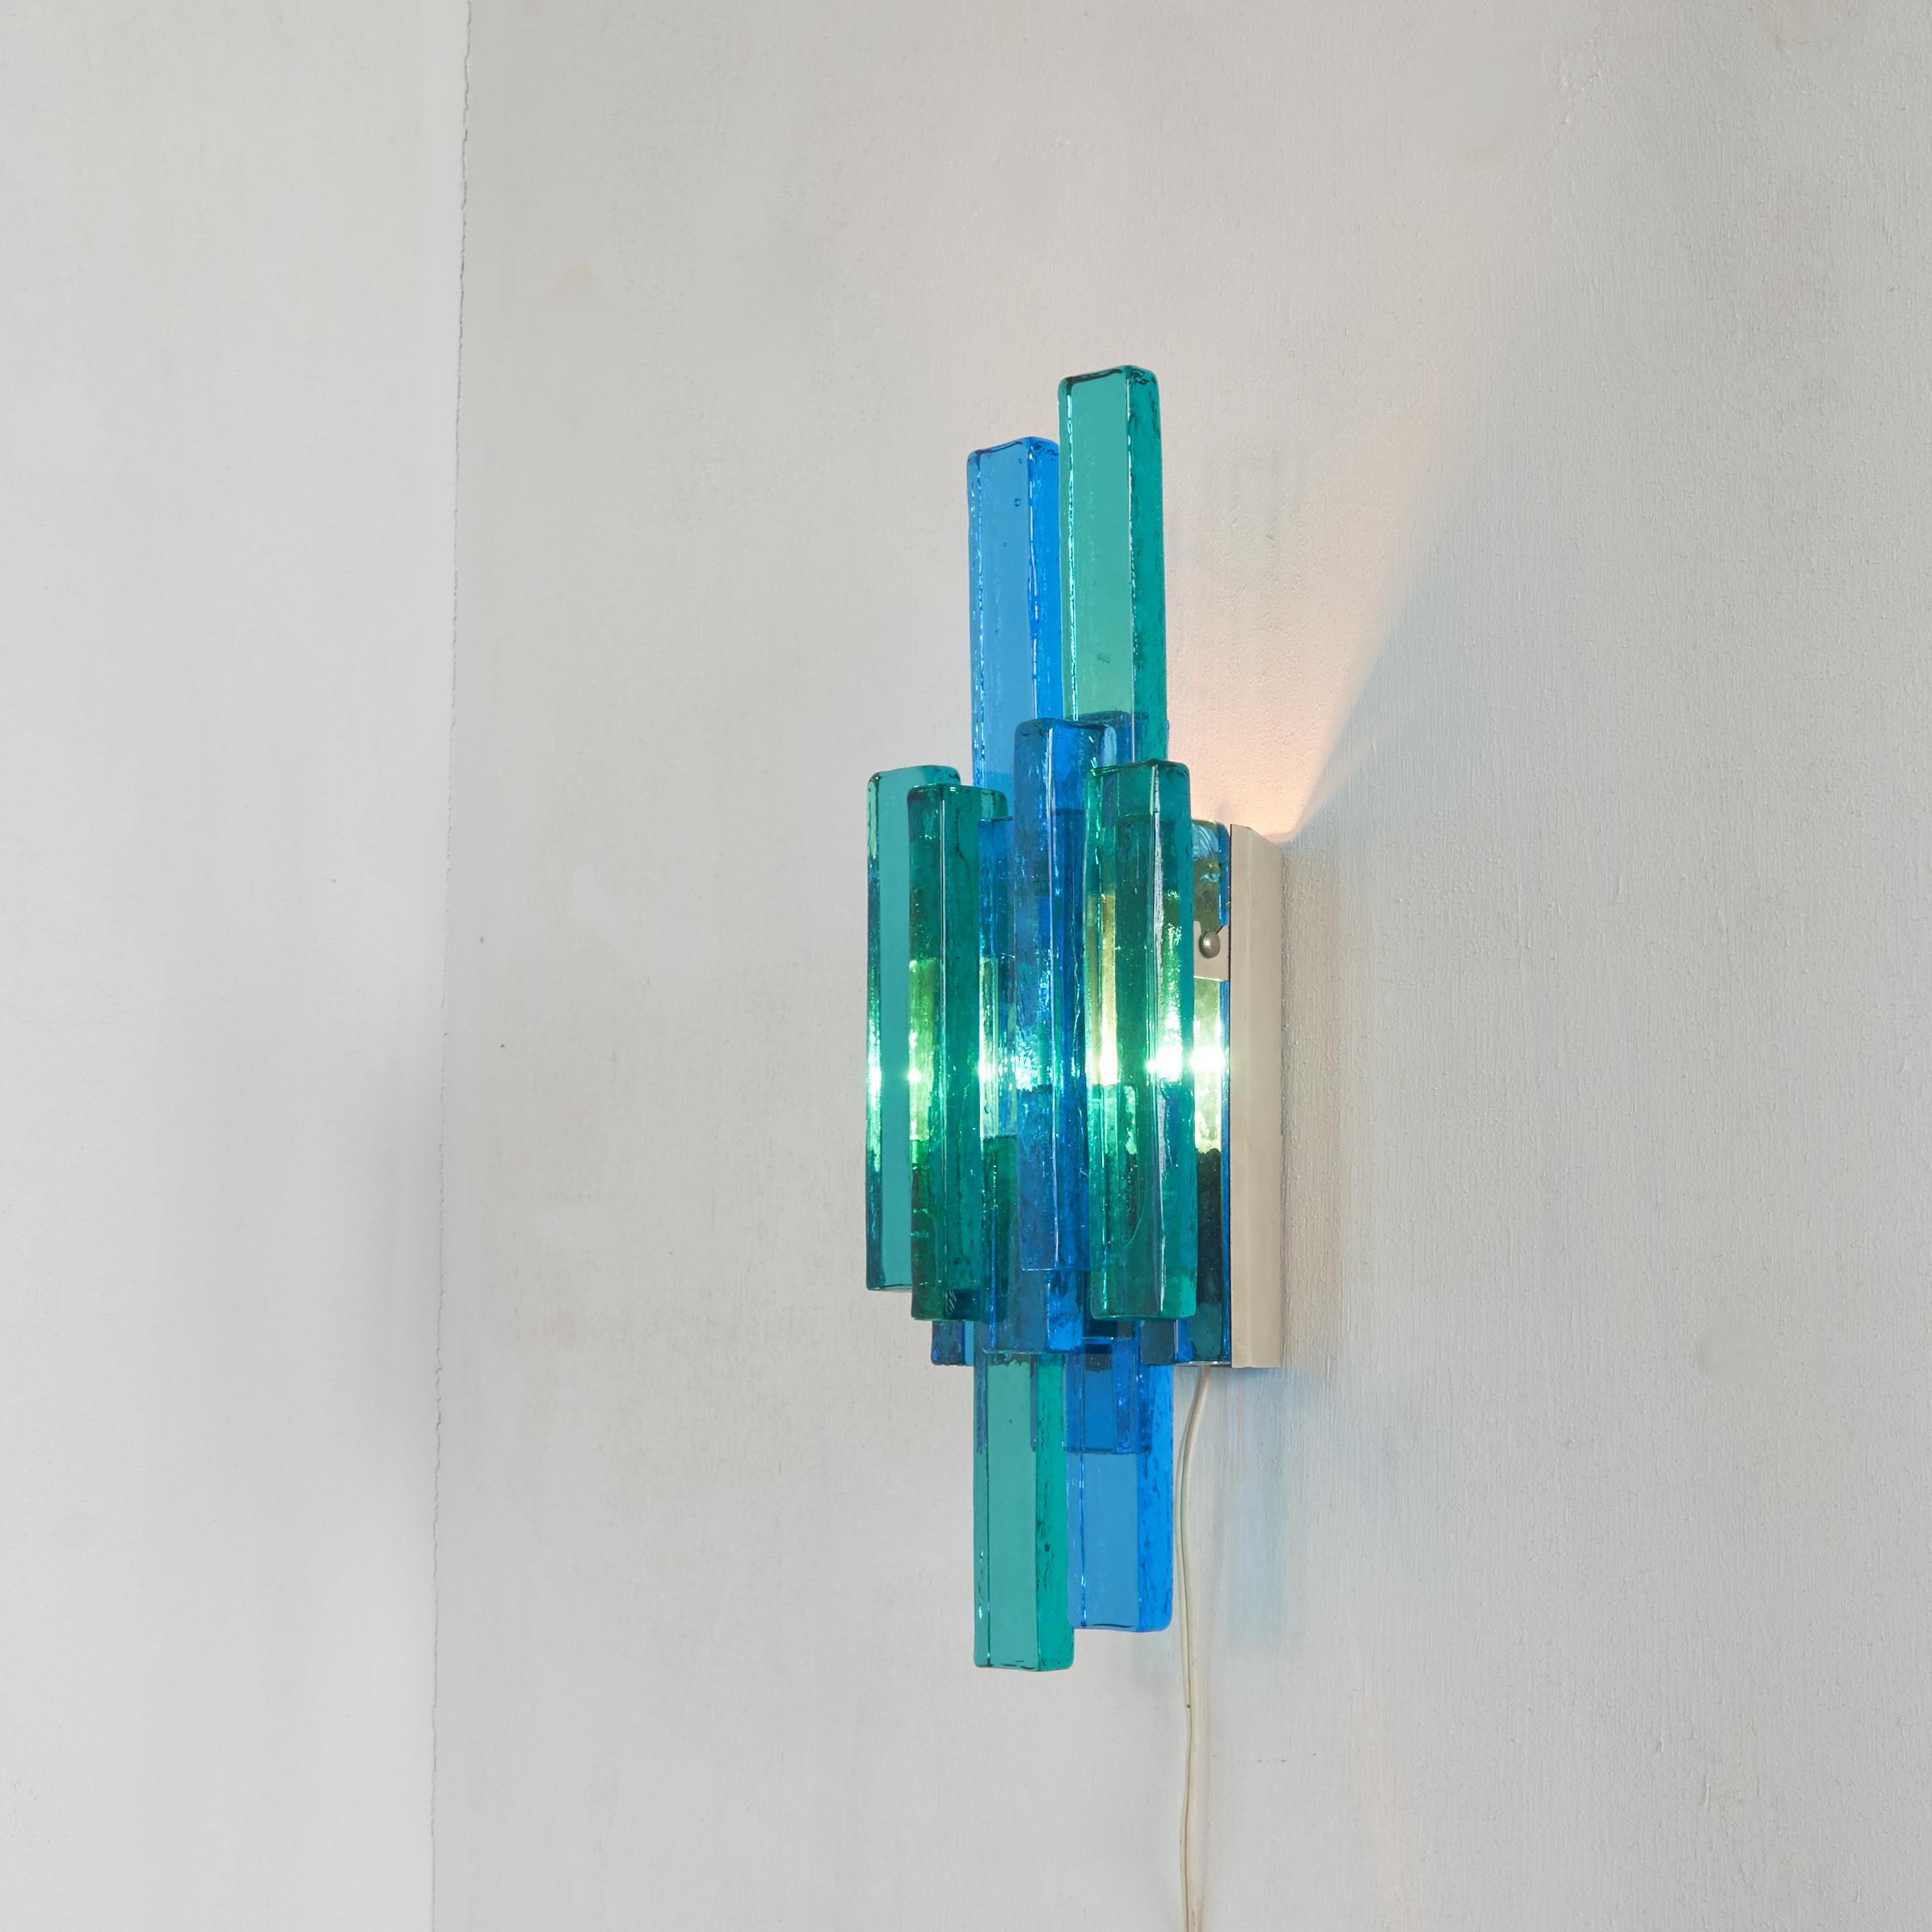 Sconce in vibrant colors by famous lighting designer Svend Aage Holm-Sørensen (1913-2004) for his company Holm Sørensen & Co.

Svend Aage Holm-Sørensen is known for a wide range of mostly colorful lighting designs, but was also a metalworker and